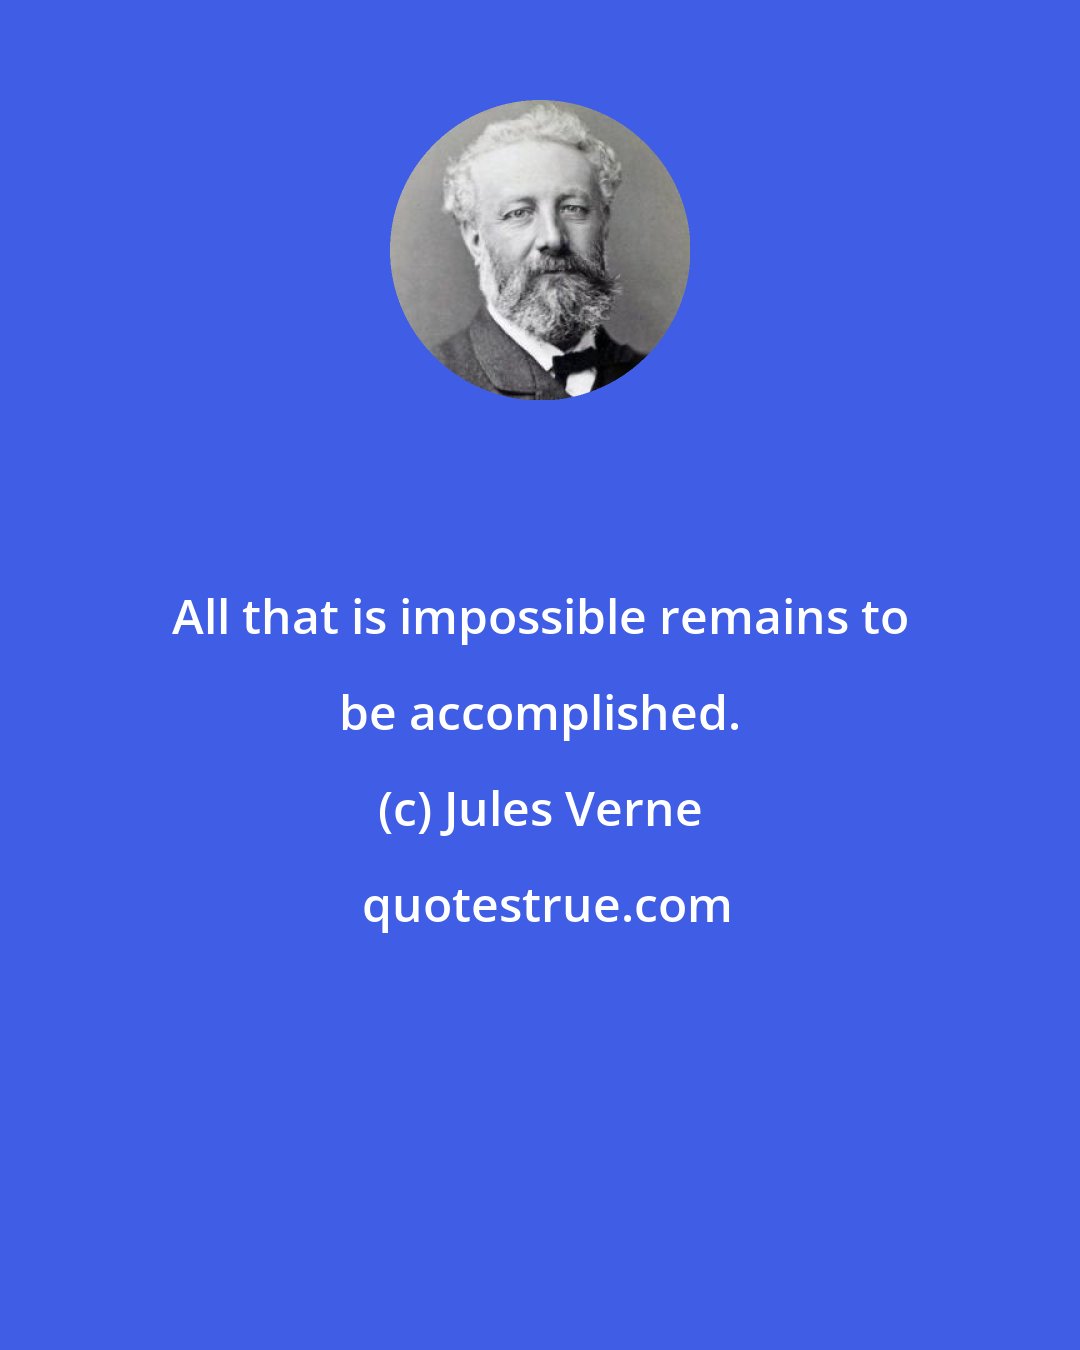 Jules Verne: All that is impossible remains to be accomplished.